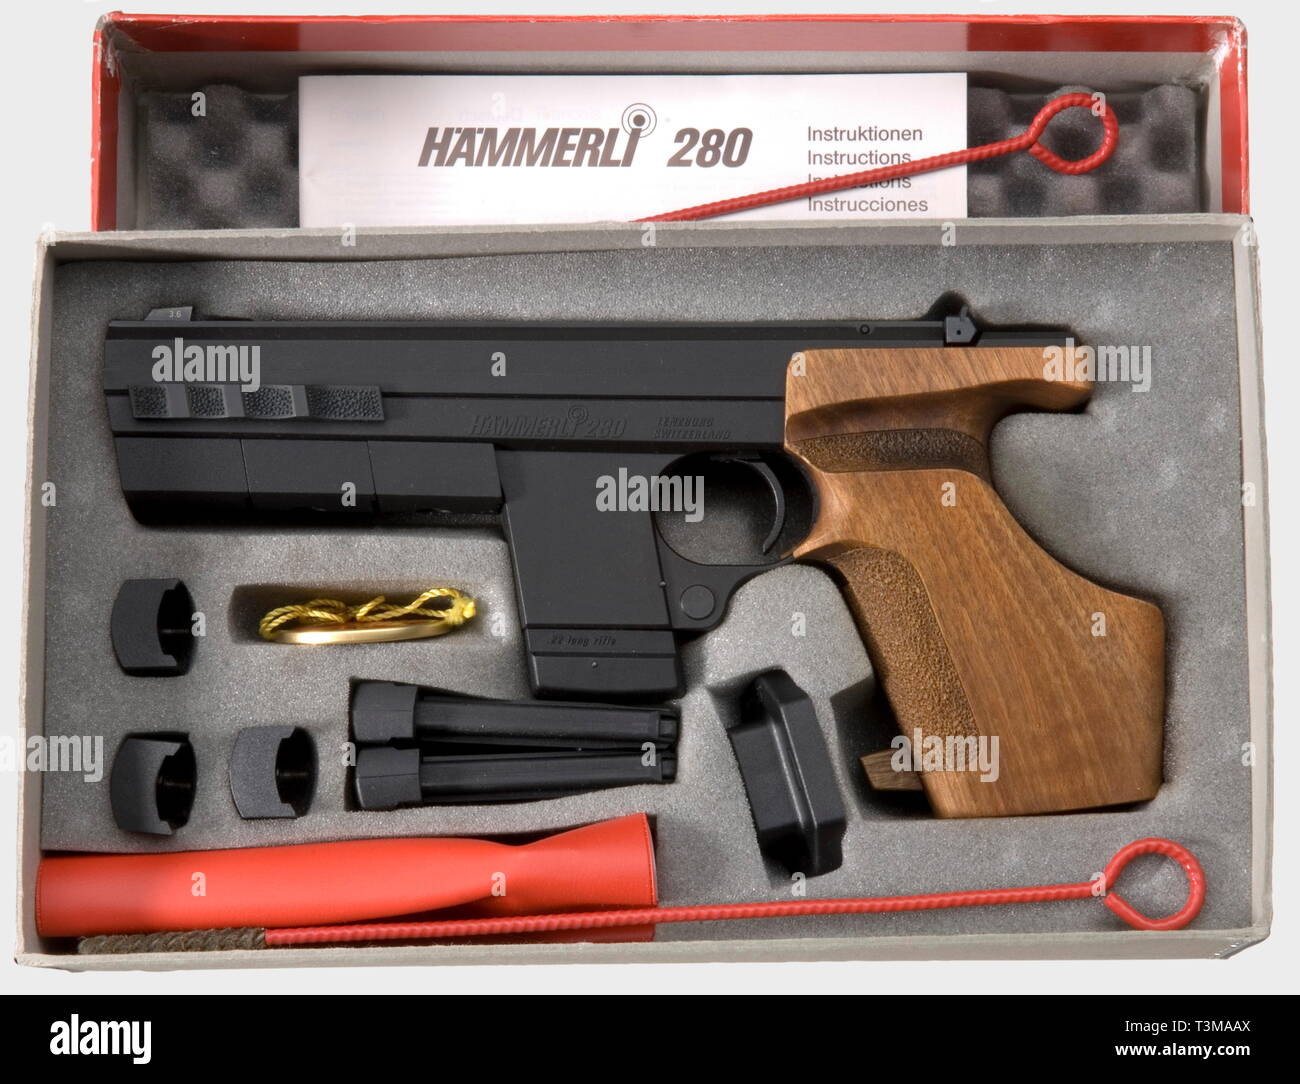 Shooting sports, pistols, Switzerland, Hämmerli 280, caliber .22, box with equipment, Additional-Rights-Clearance-Info-Not-Available Stock Photo